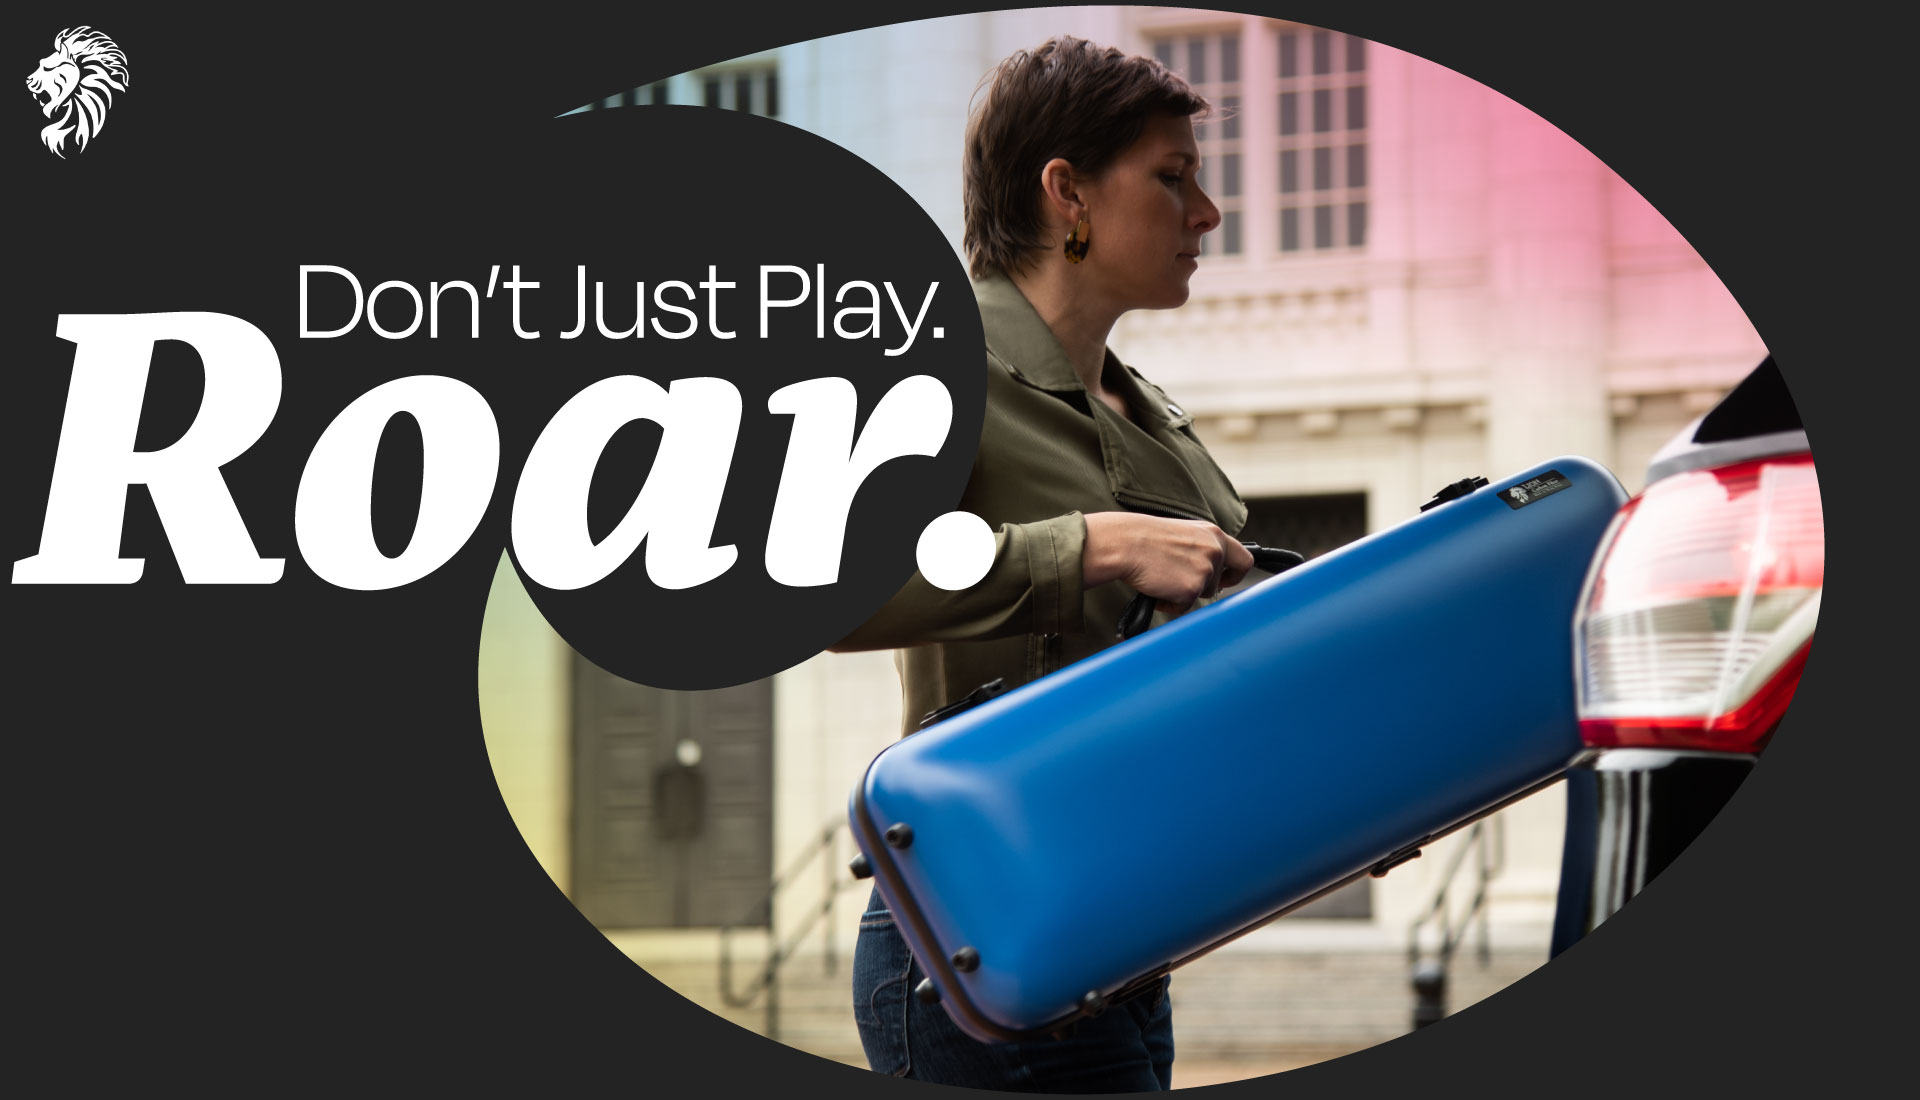 Lion Cases. Don't Just Play. ROAR.